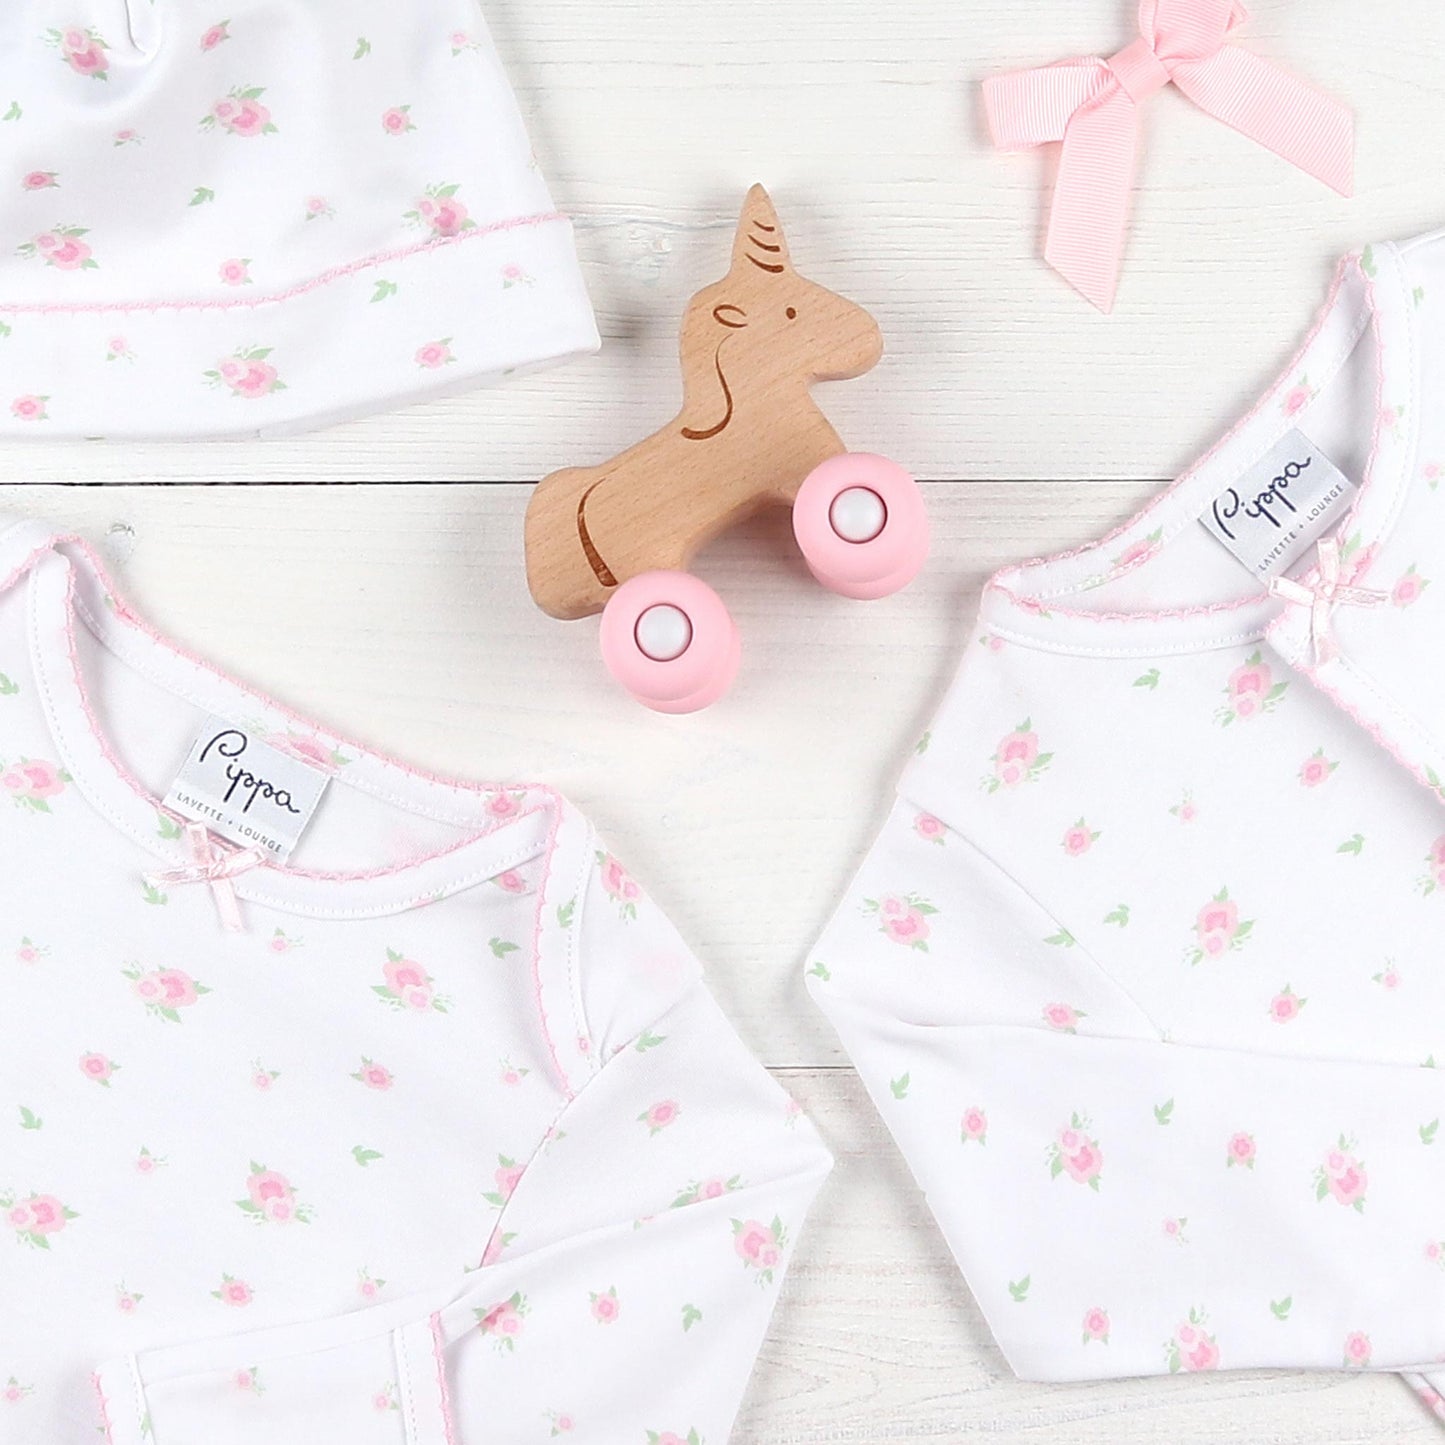 flatlay of flowered pajamas, pink bow and a wooden toy unicorn